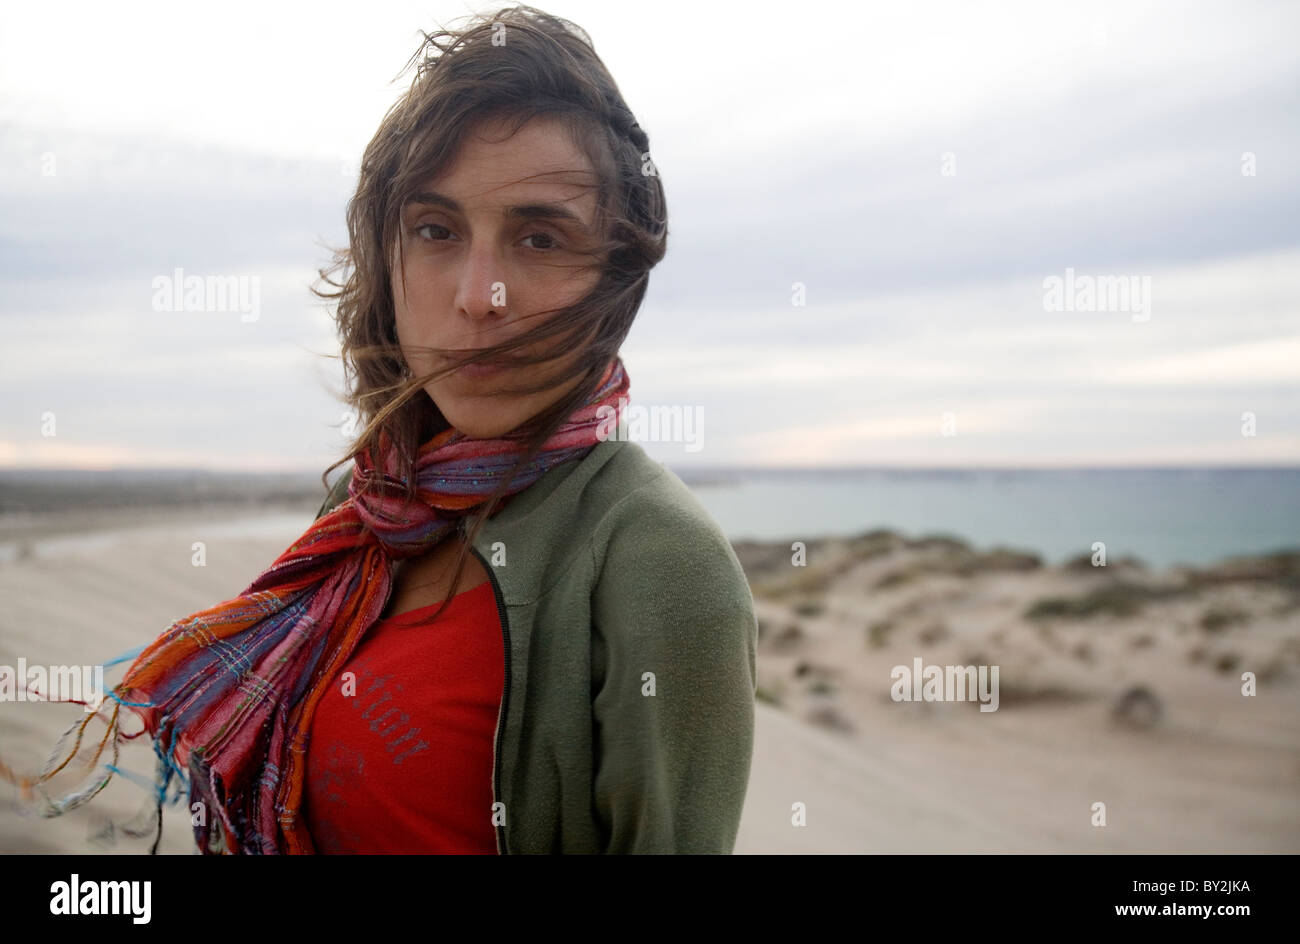 Portrait of Argentinean women at sand dunes. Stock Photo